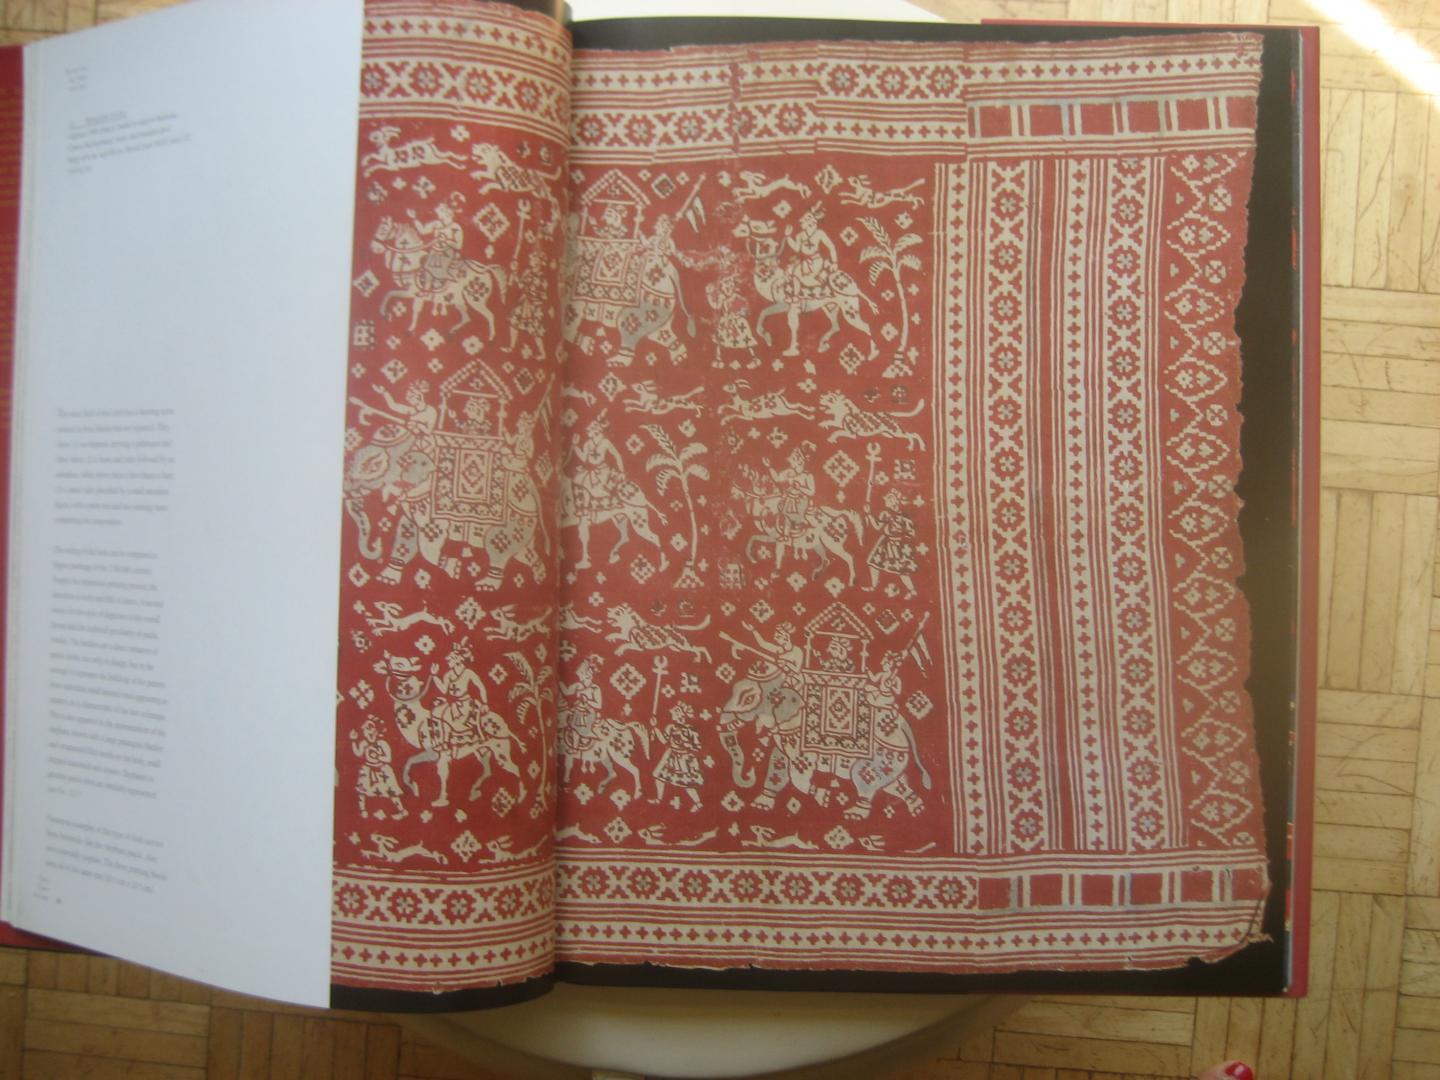 Diverse - Trade, Temple & Court: Indian Textiles from the Tapi Collection